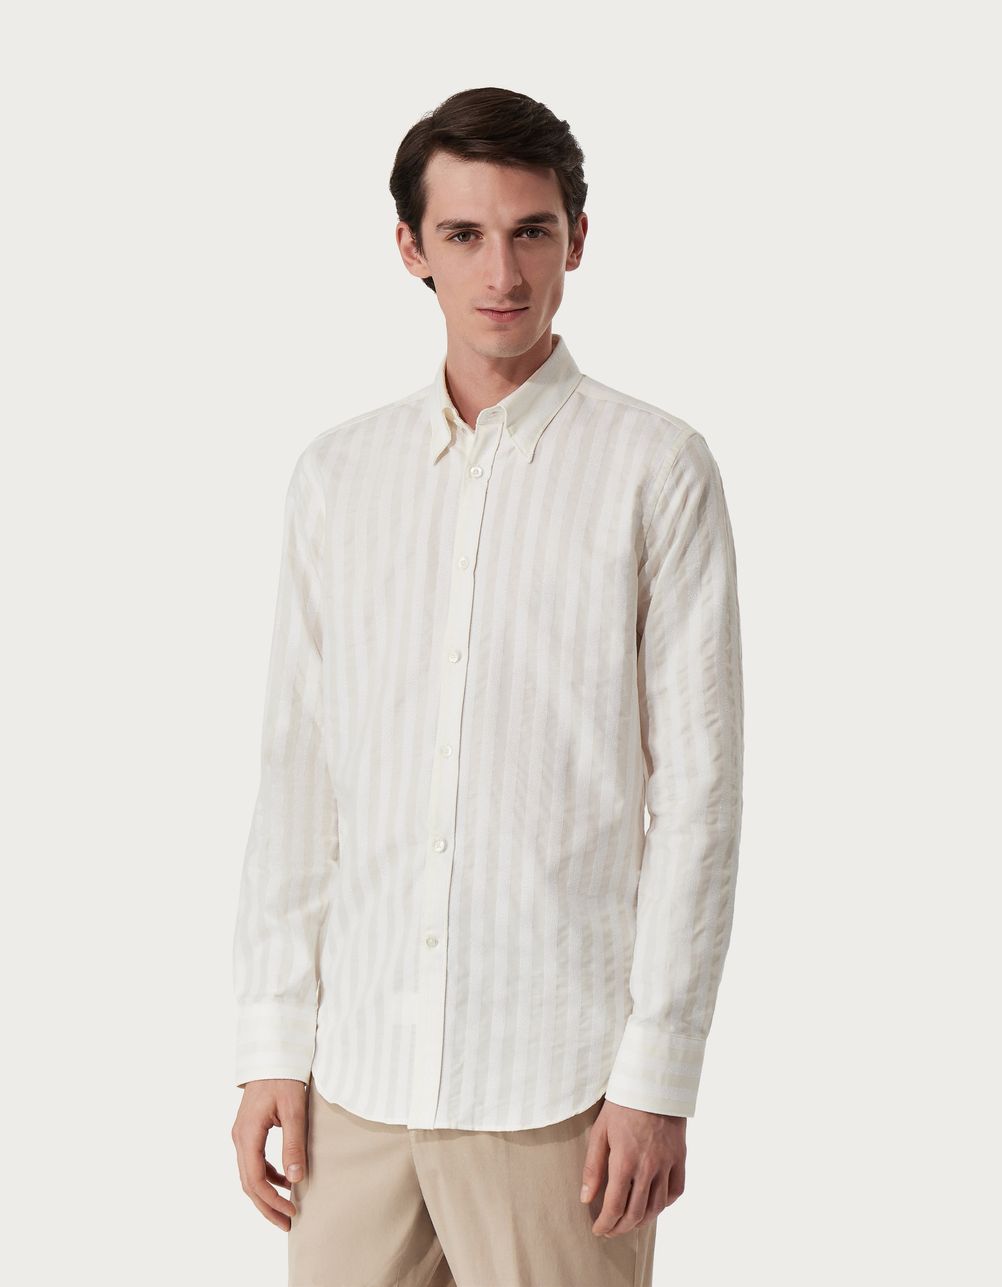 Slim-fit shirt in white and beige striped cotton